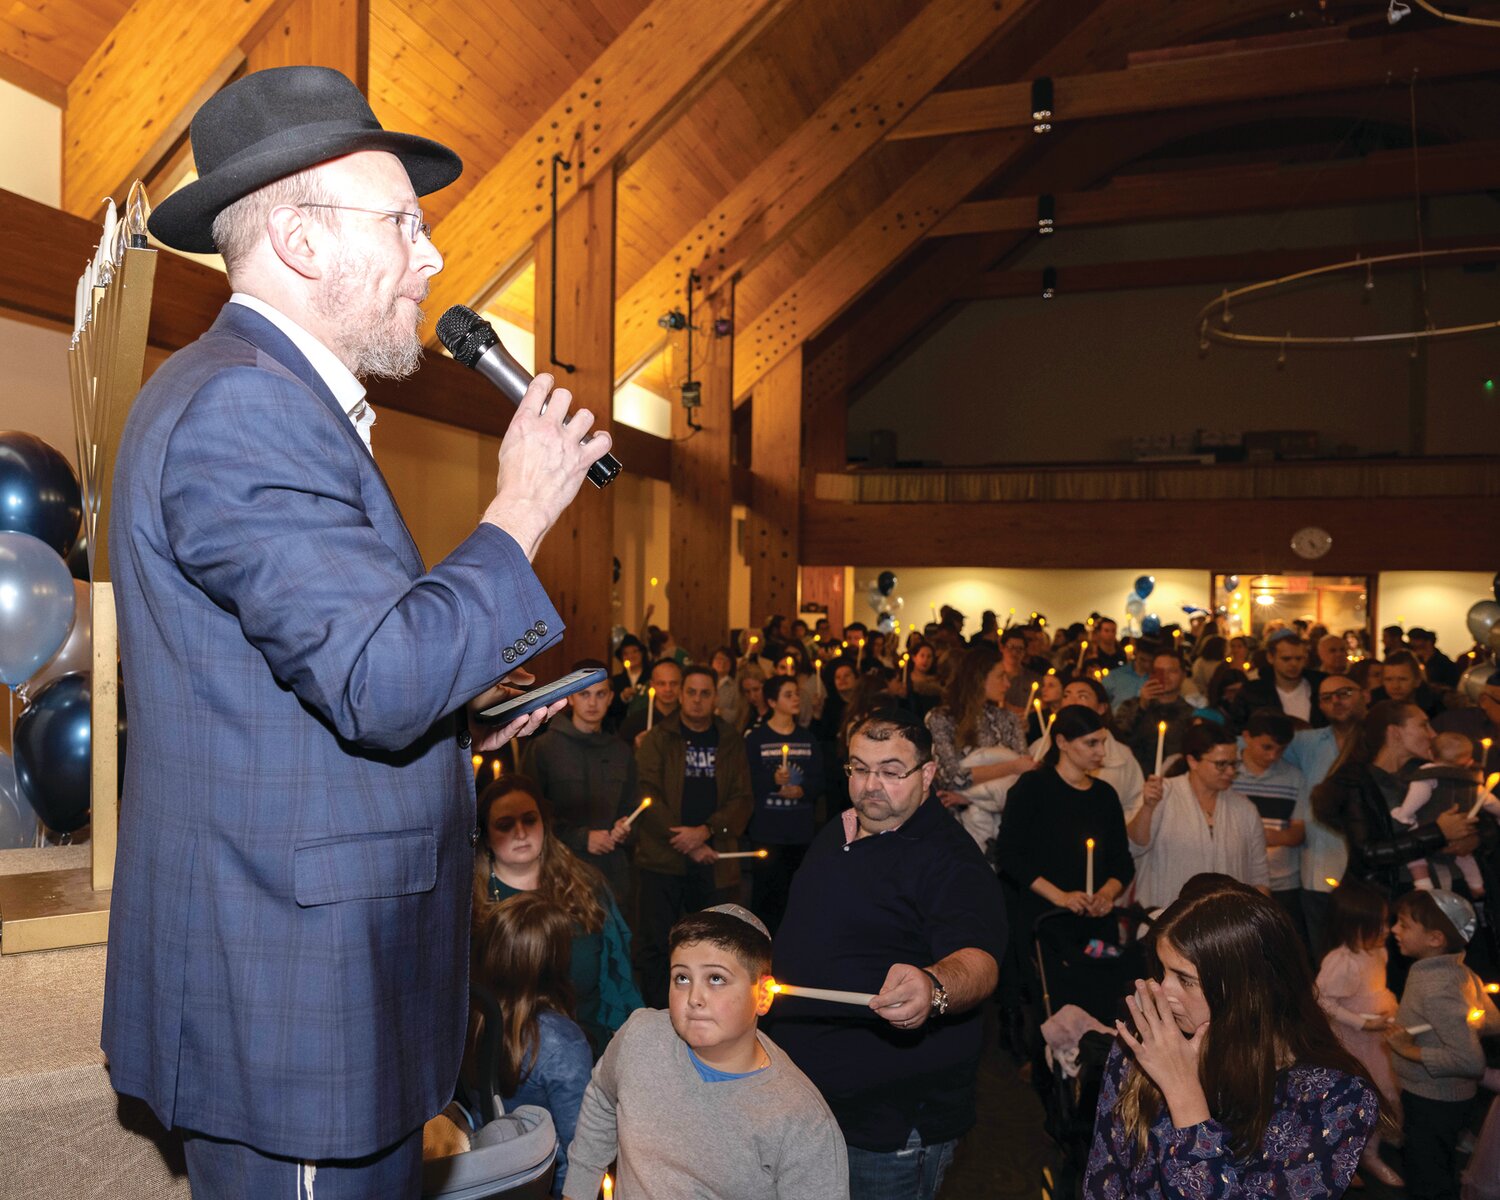 Rabbi Aryeh Weinstein addresses the crowd at the Family Chanukah Celebration, hosted by Lubavitch of Bucks County.